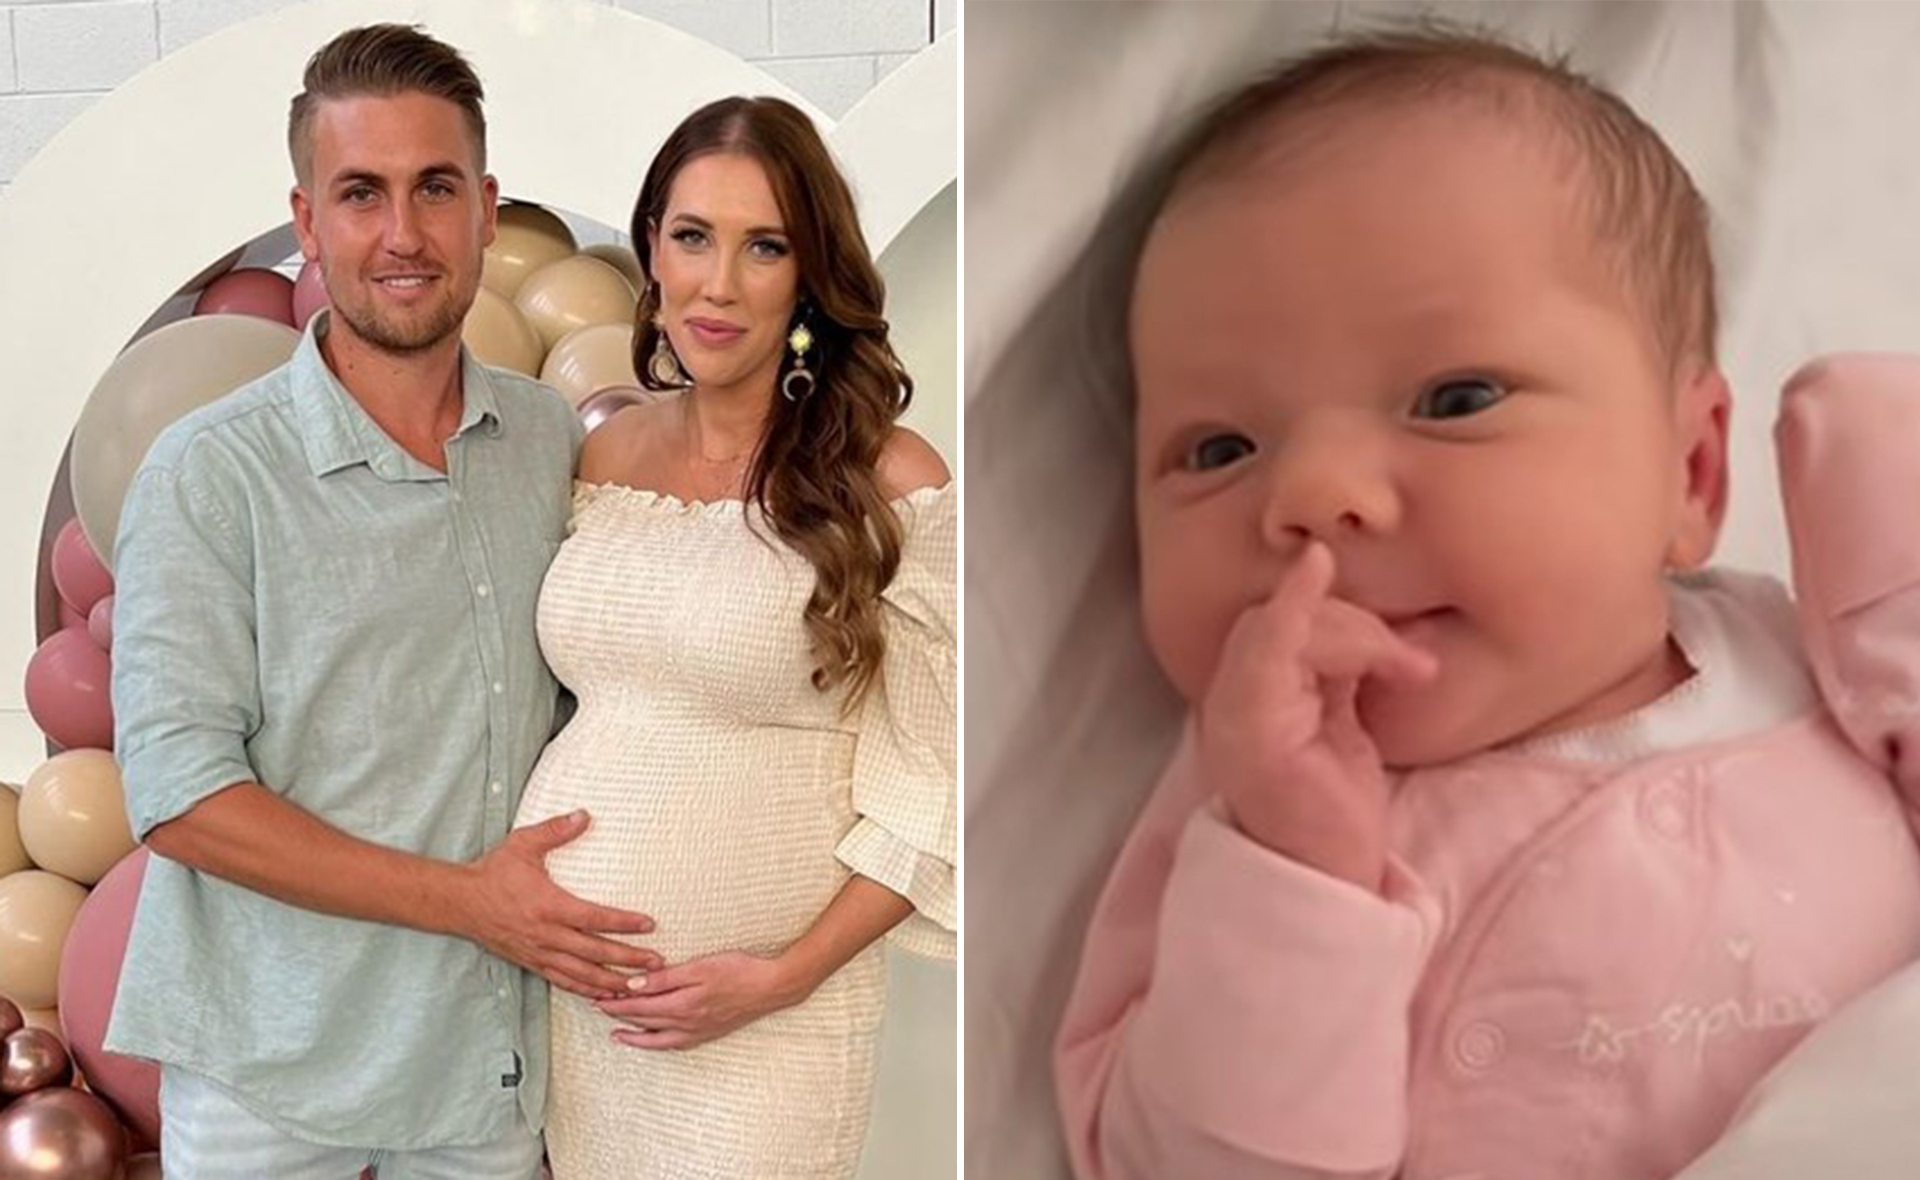 MAFS star Beck Zemek reveals her newborn daughter’s unique name and shares details of her mammoth labour